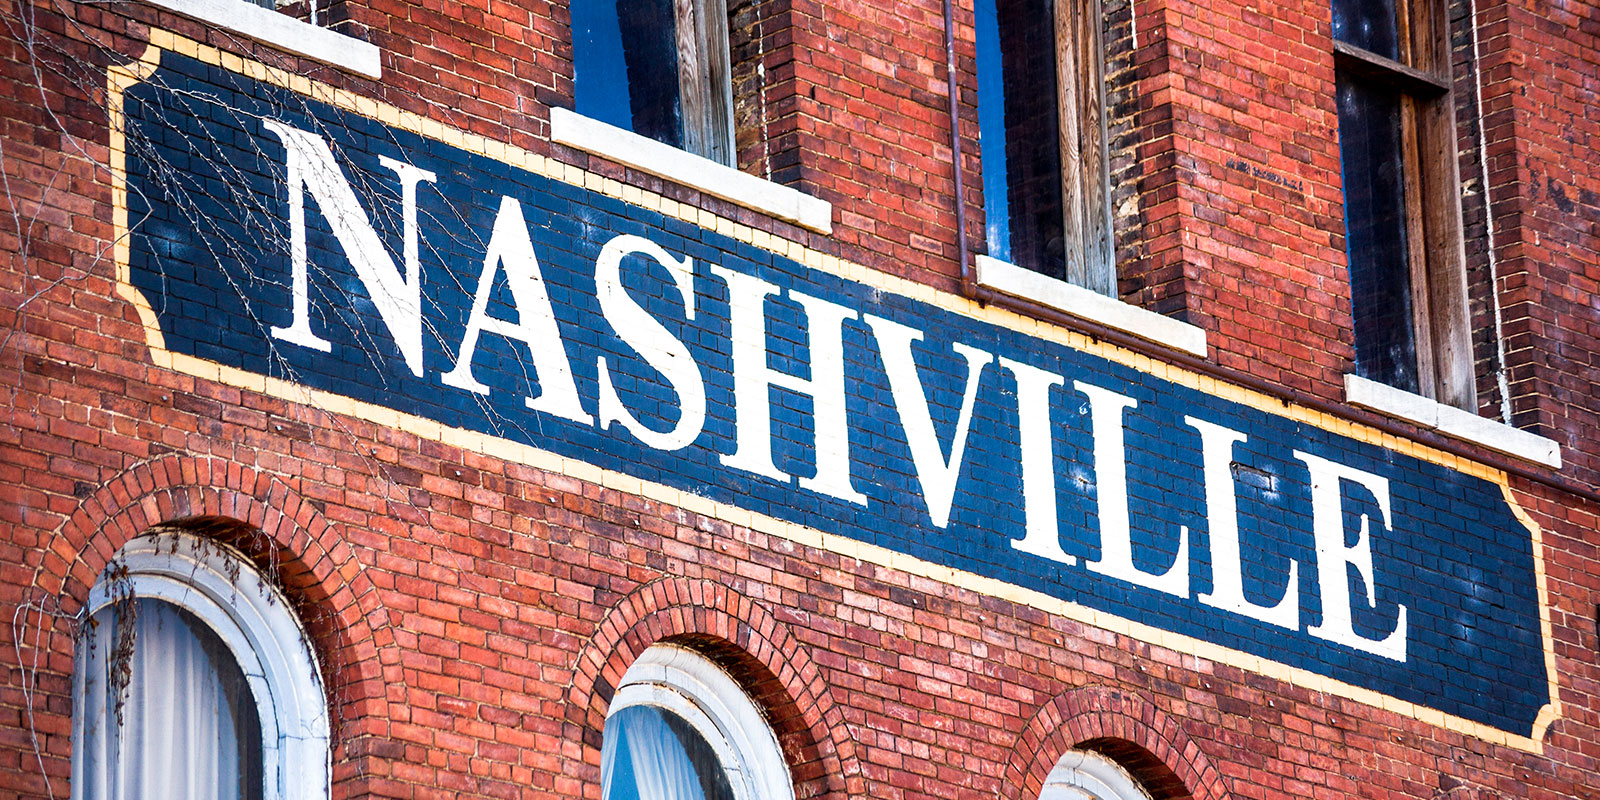 City of Nashville sign painted on the side of a brick building